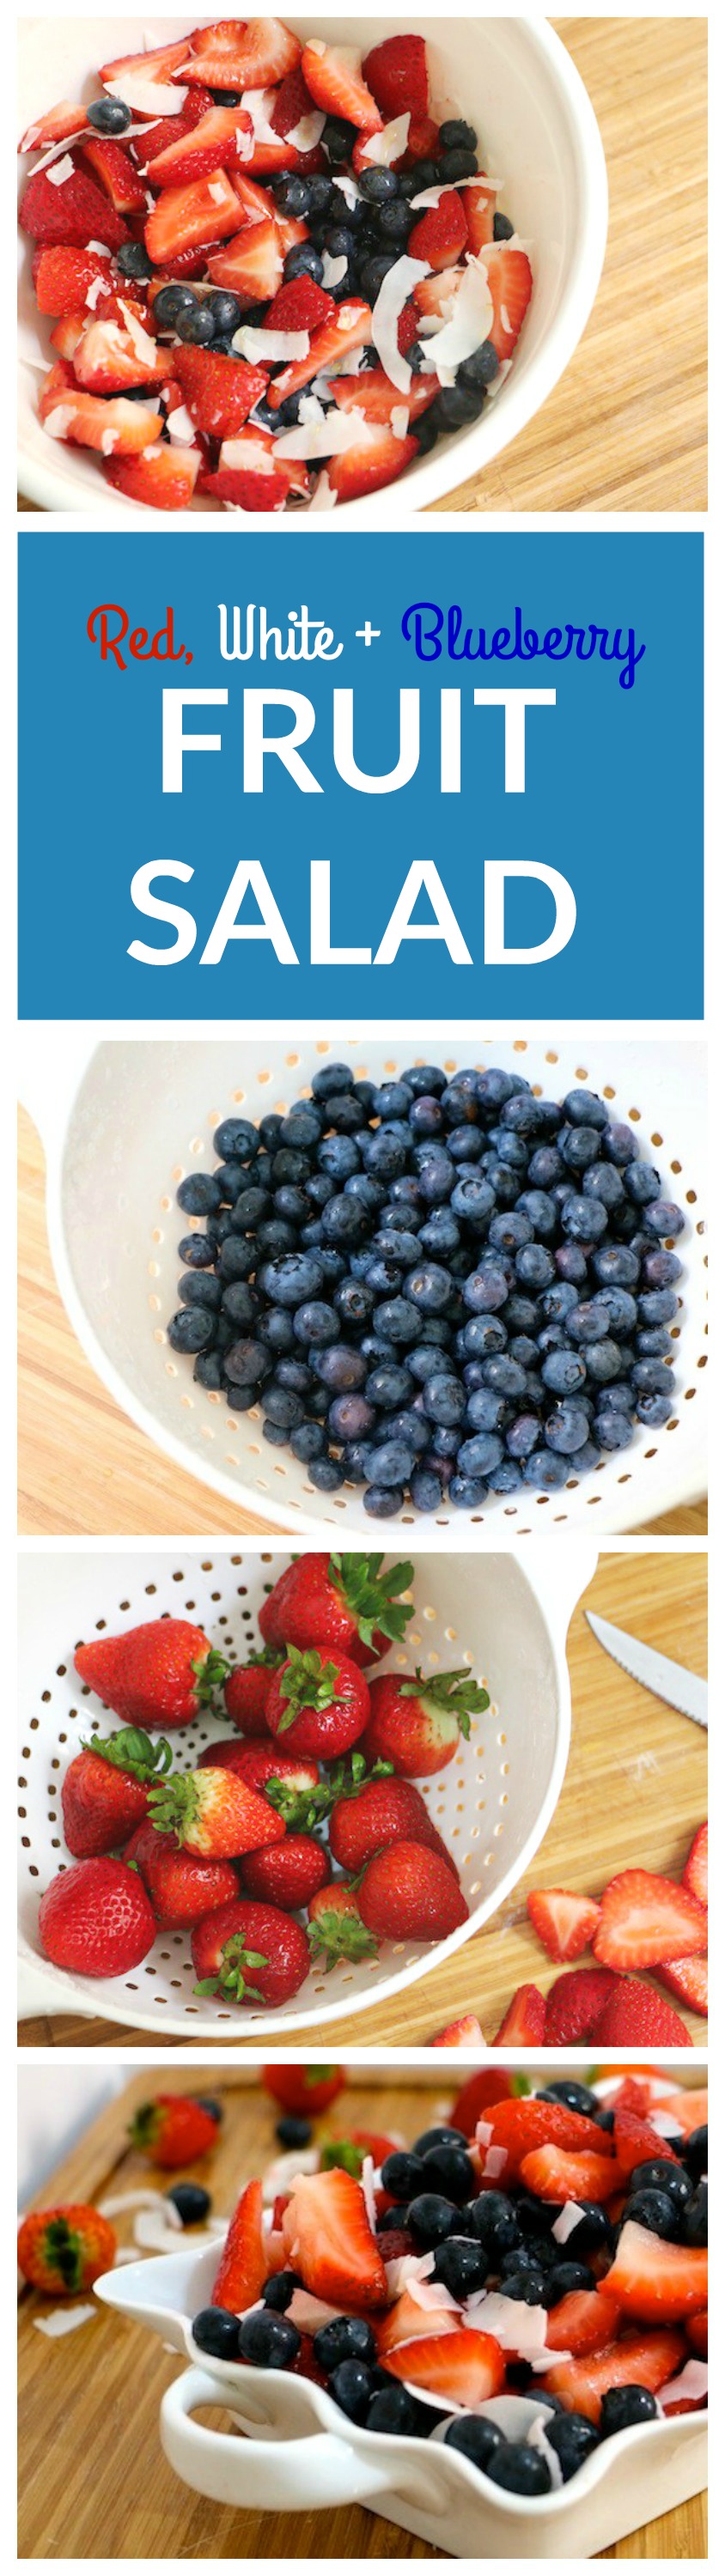 Red White Blueberry Fruit Salad